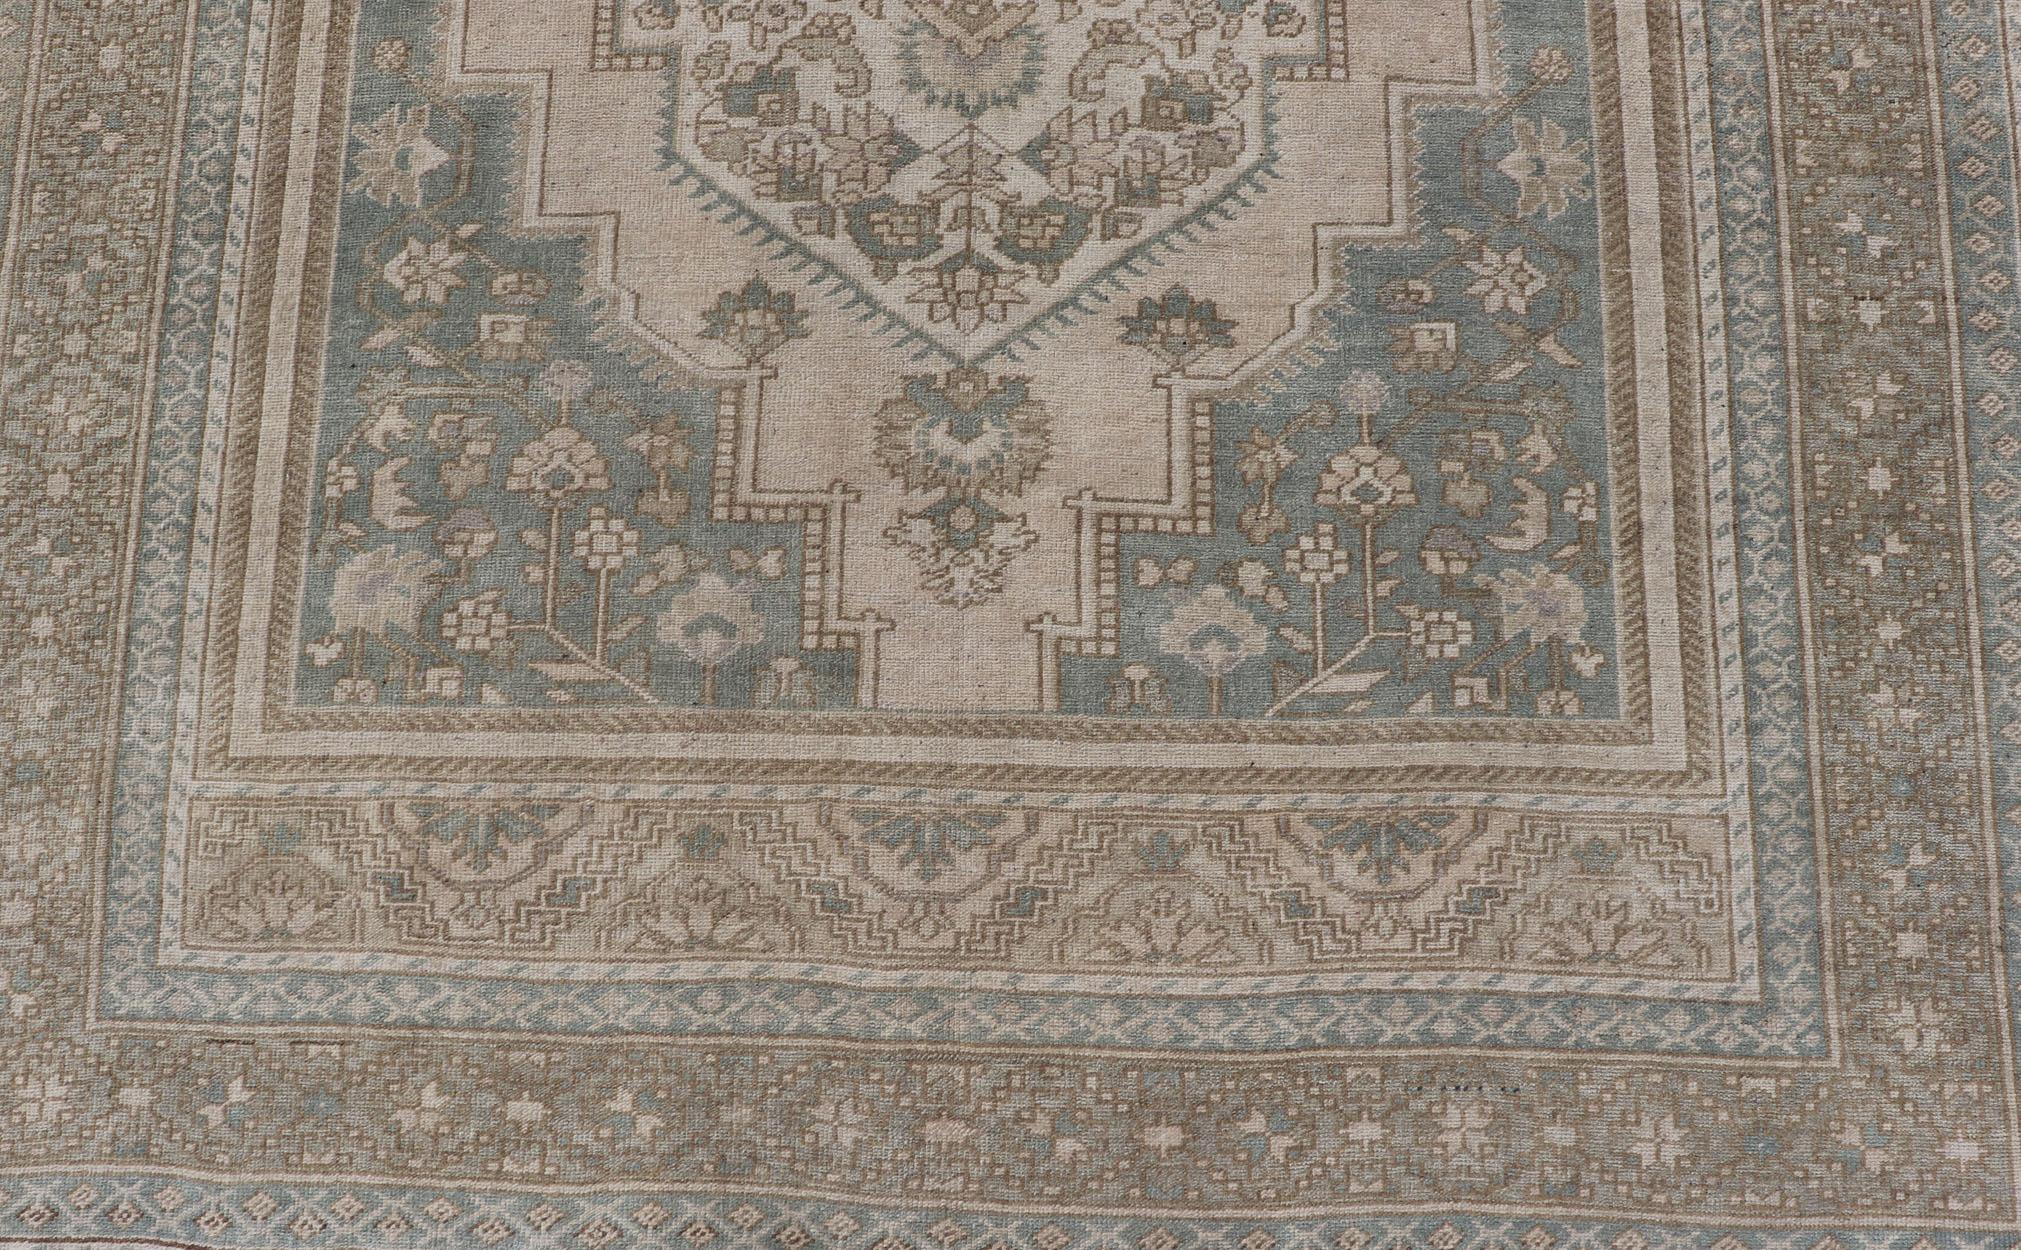 20th Century Turkish Oushak Vintage Medallion Rug in Light Blue-Green, Tan, Taupe, and Cream For Sale